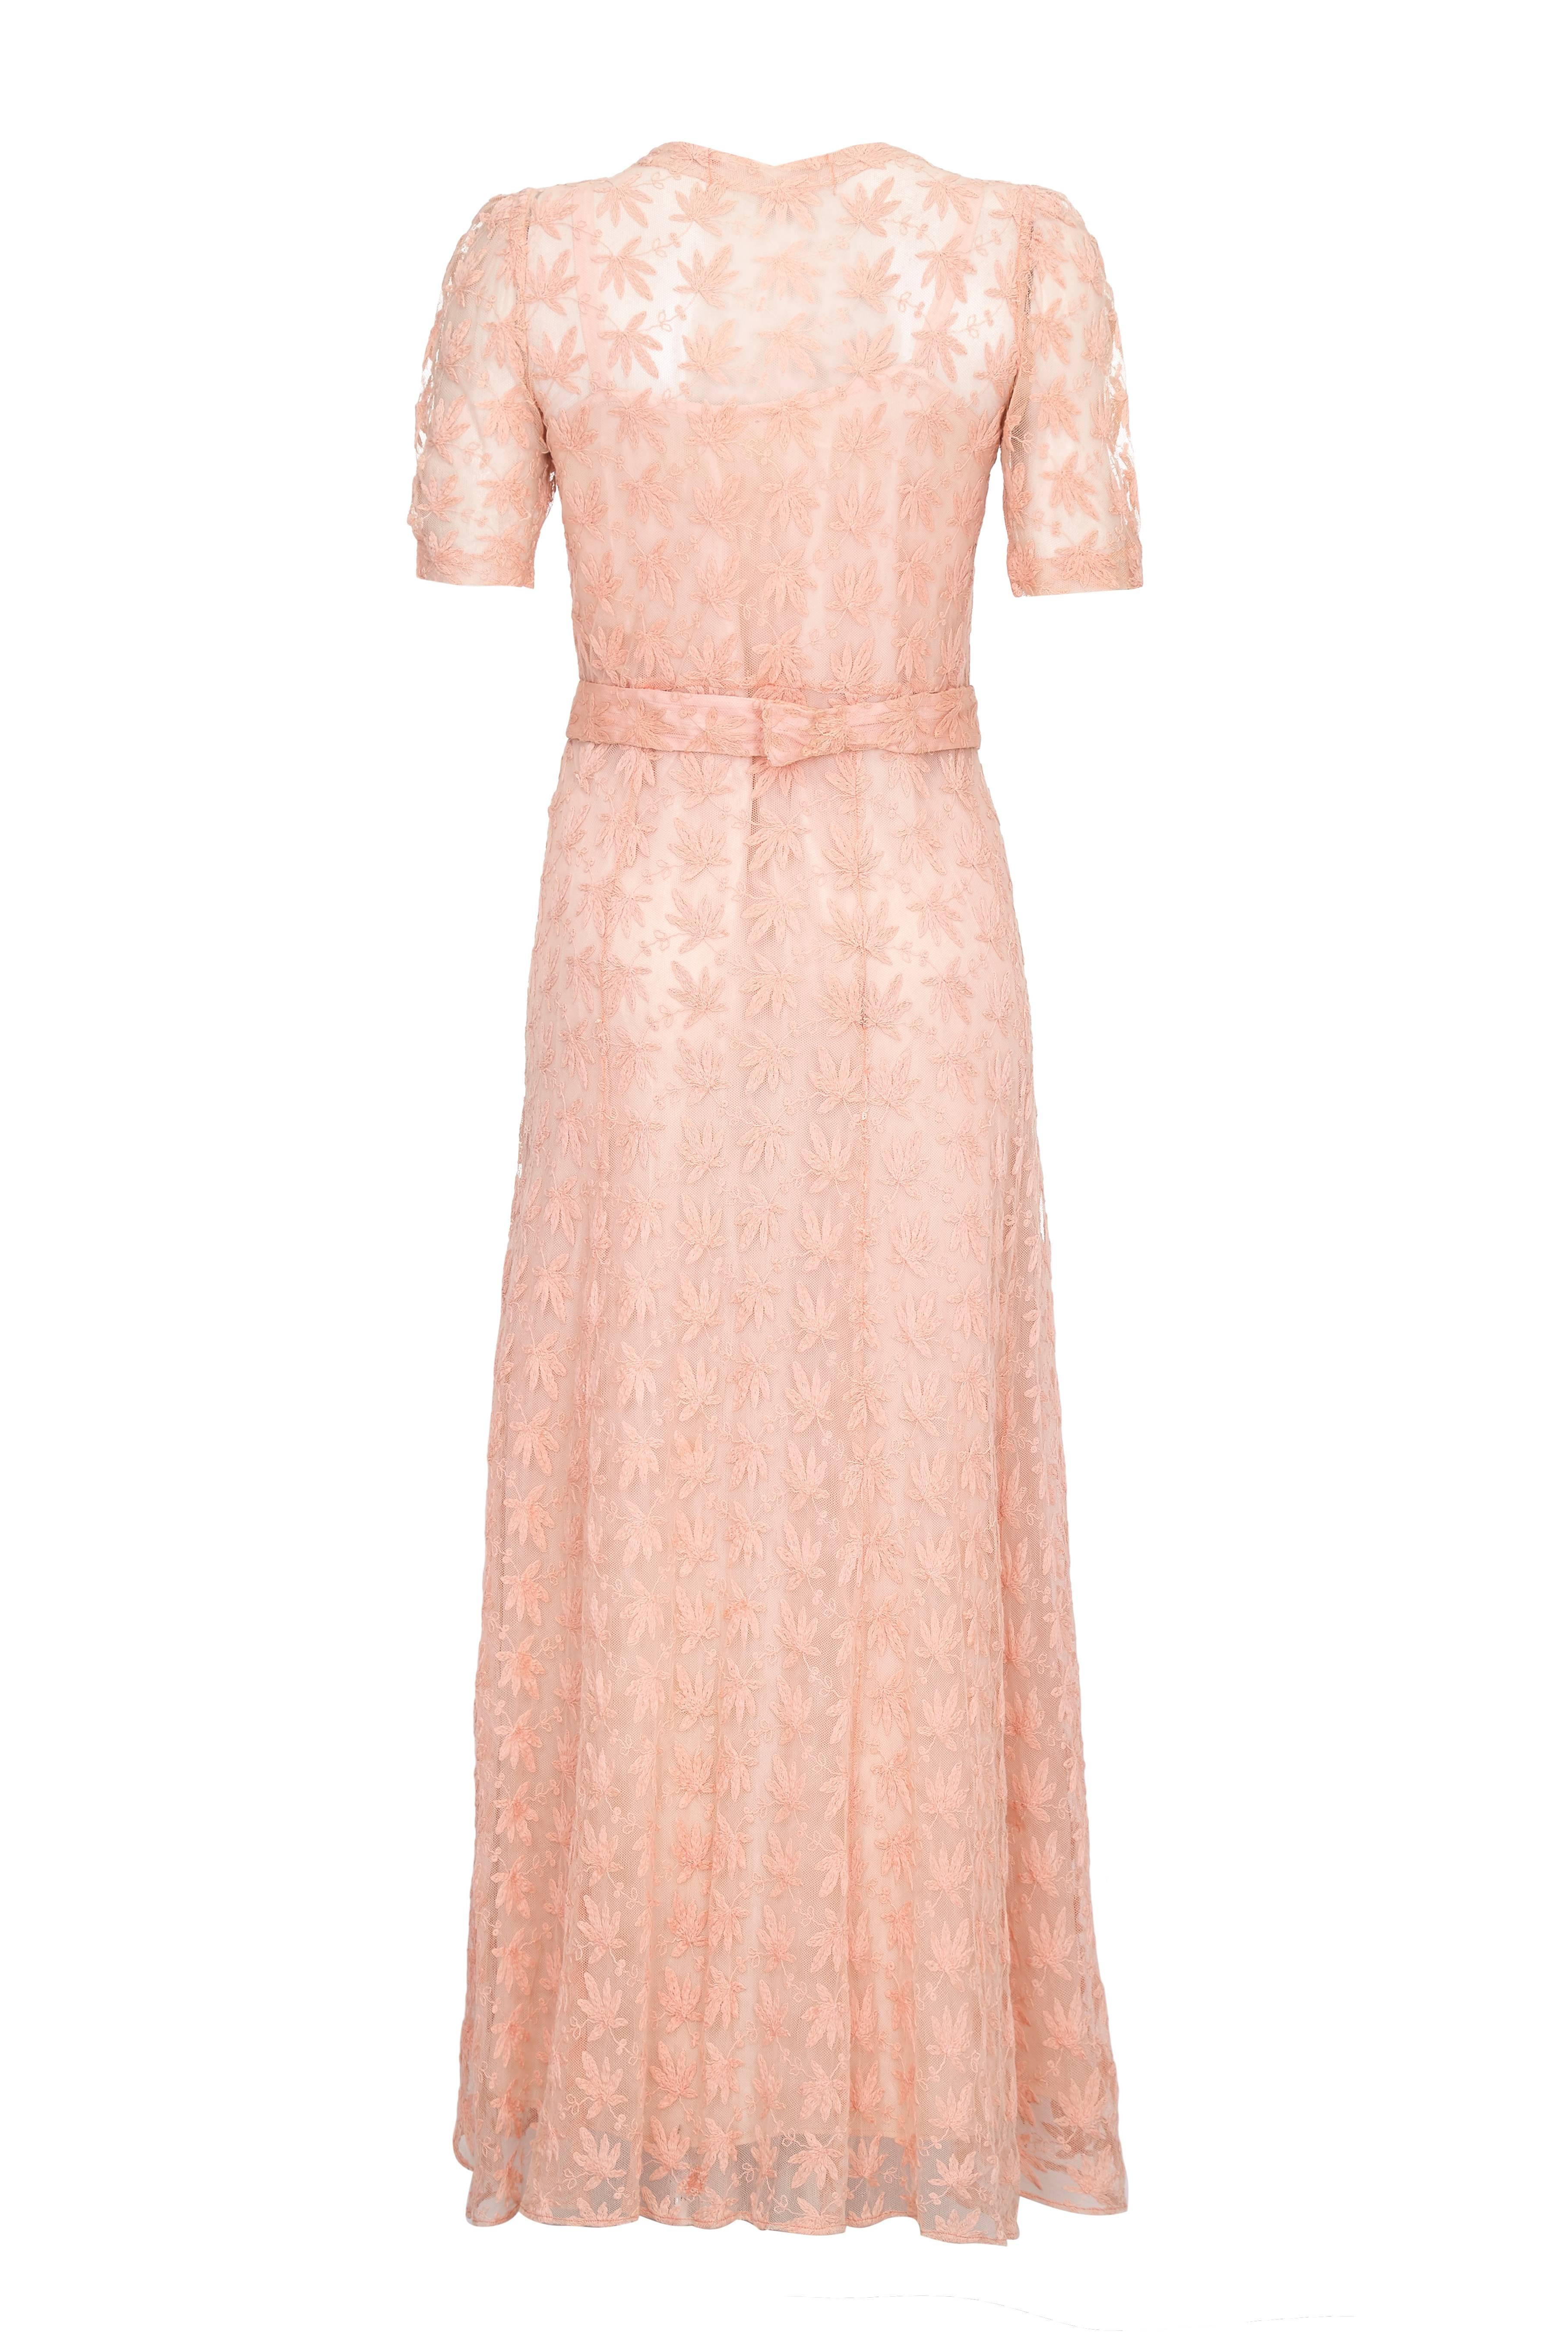 This enchanting 1930s vintage dress in pale pink translucent net with delicate leaf embroidery comes with a matching belt which fastens at the reverse with hook and eyes. This beautiful dress has a wonderfully feminine aesthetic and would be a